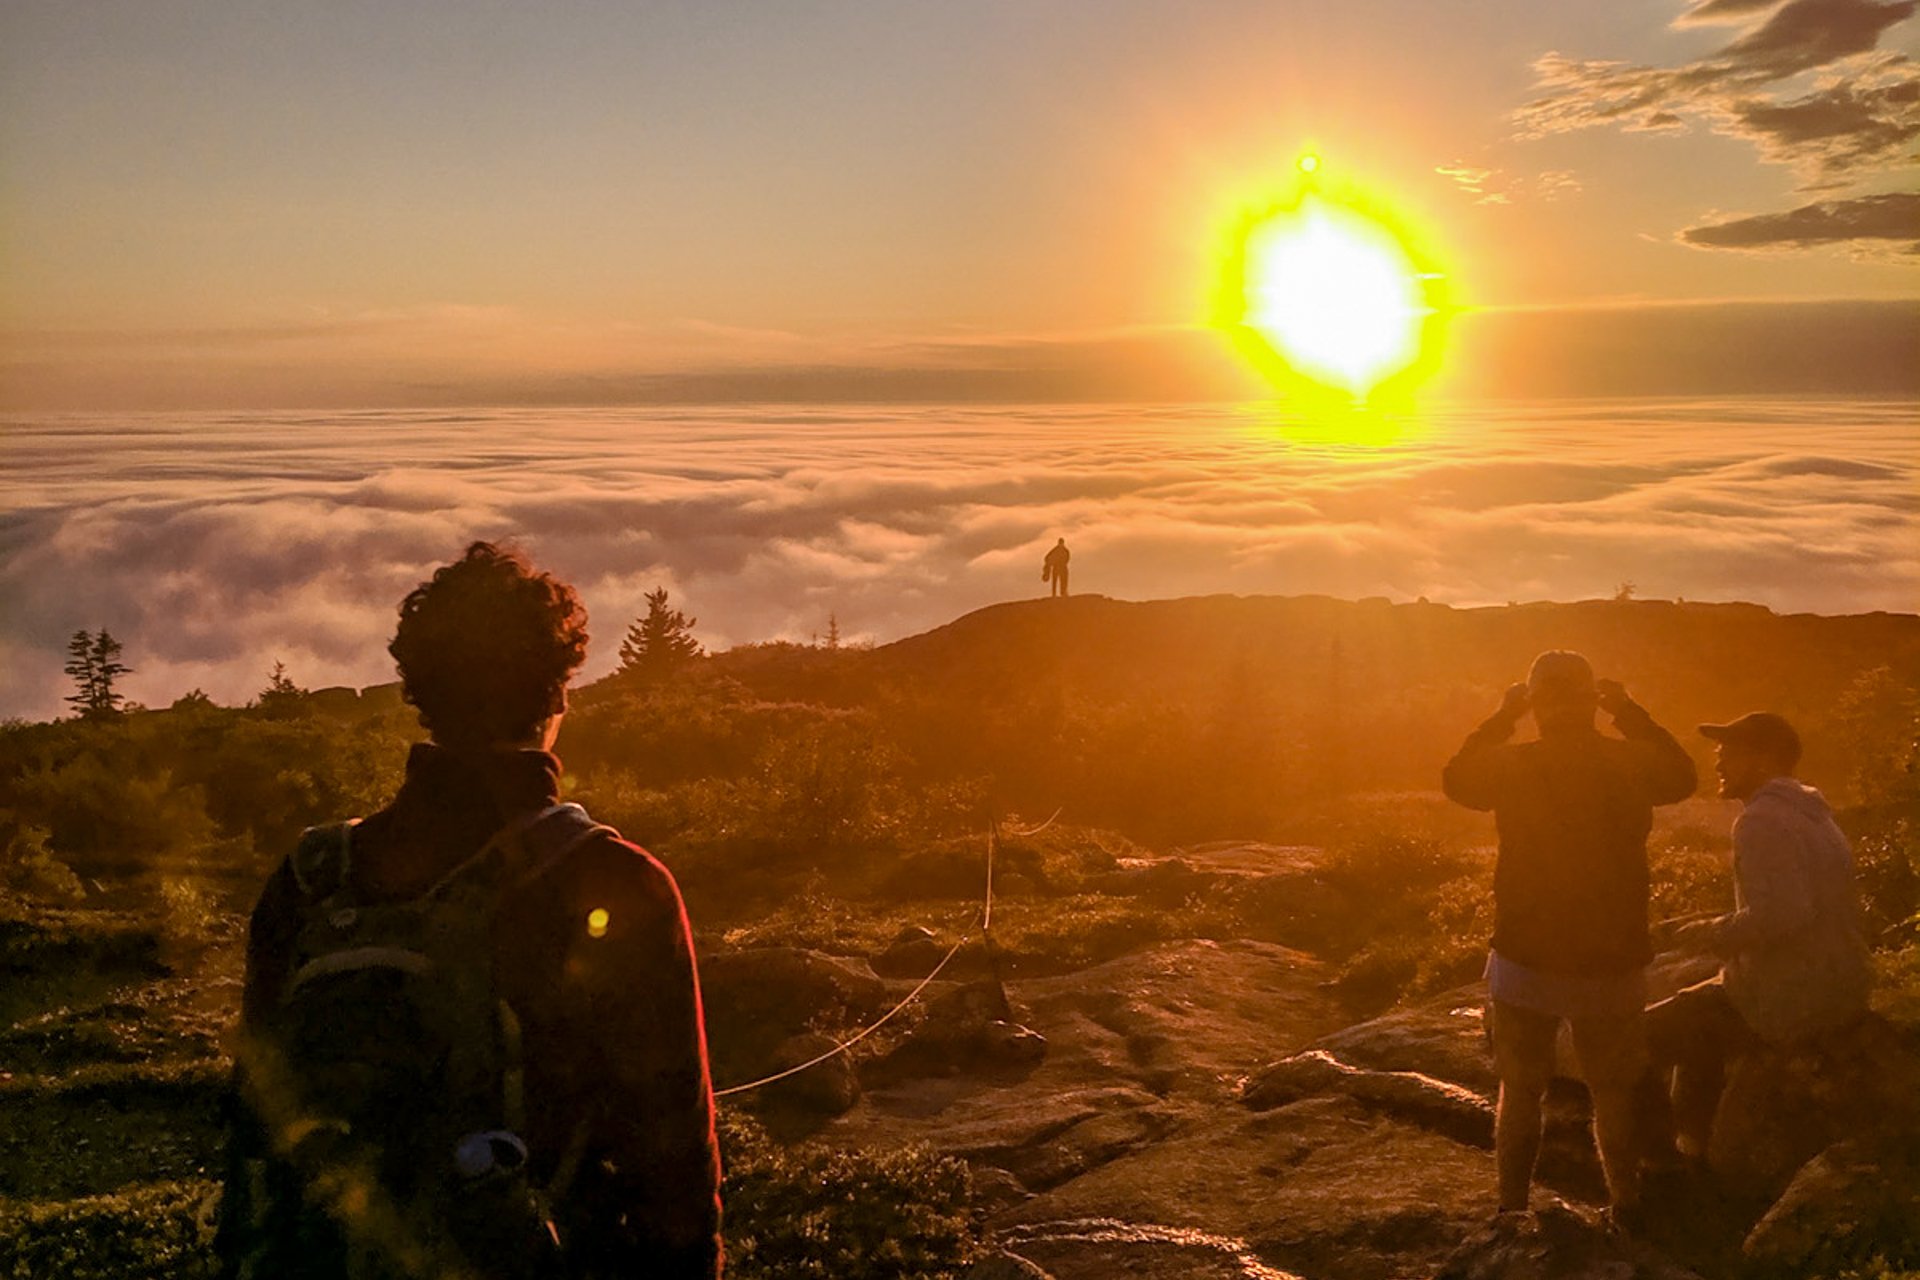 A teen adventure trip participant takes in a stunning sunset from the top of Cadillac Mountain, with a sea of clouds visible below and into the distance